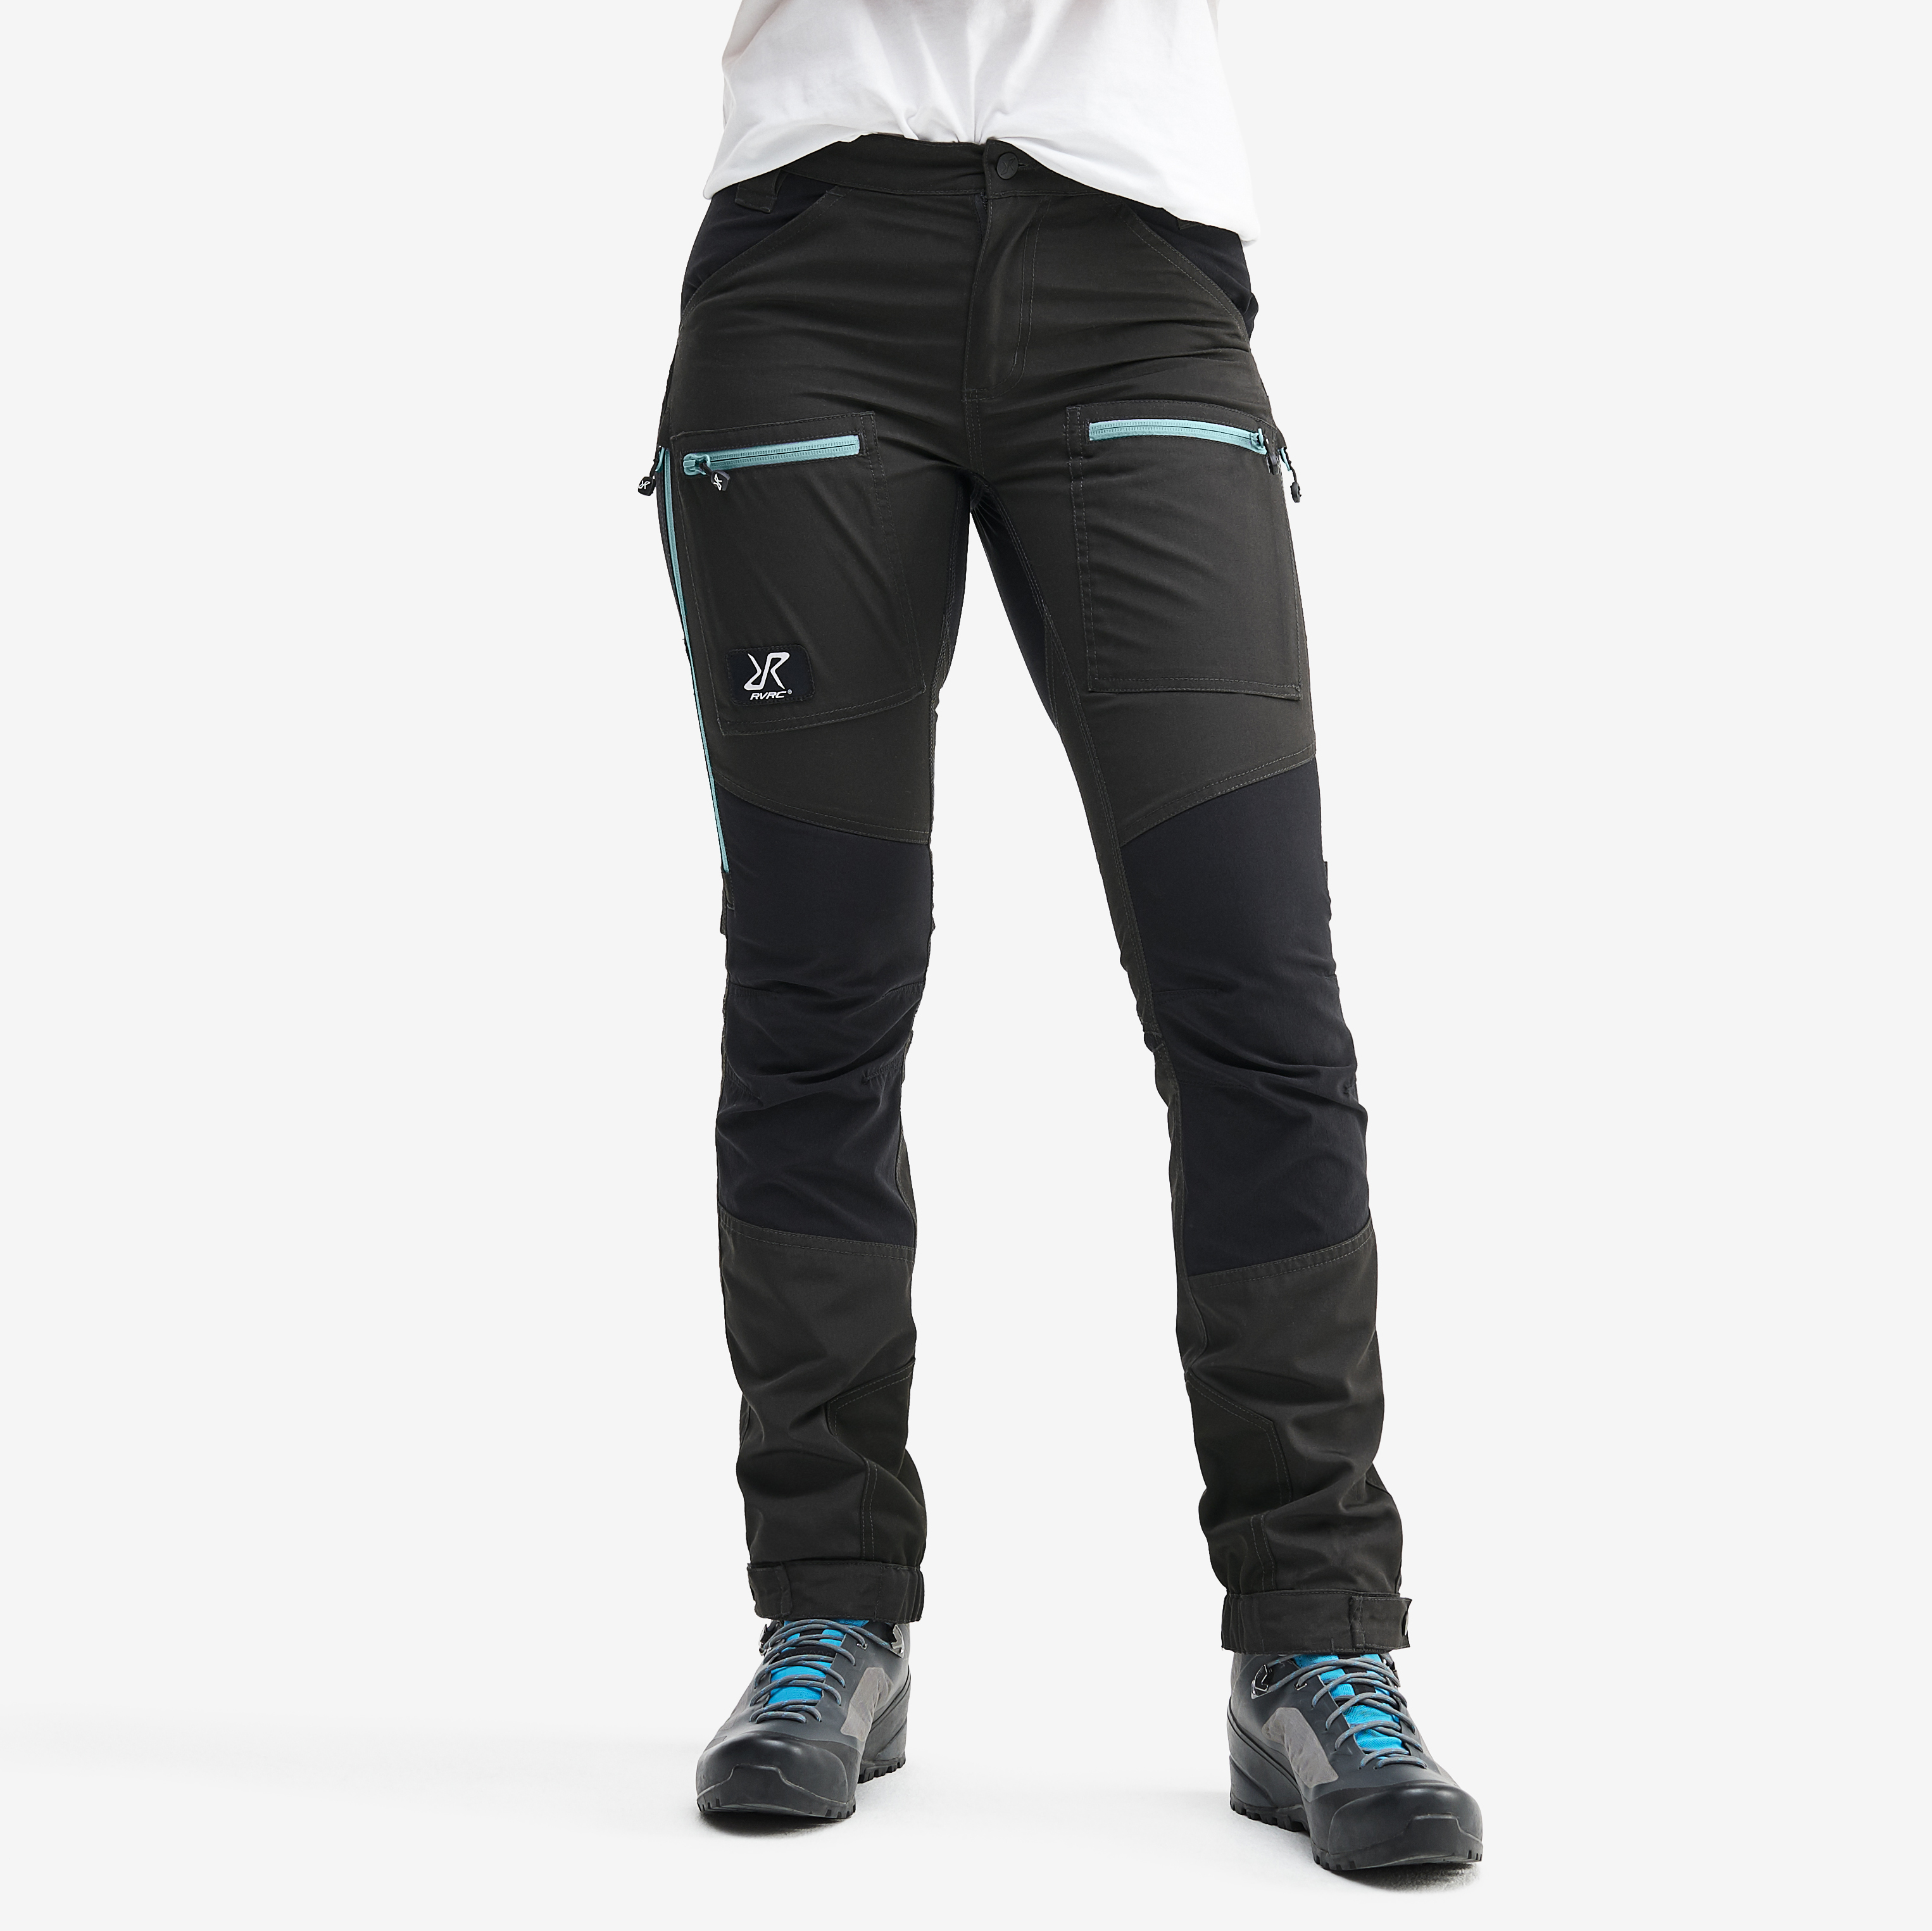 Nordwand Pro hiking trousers for women in dark grey